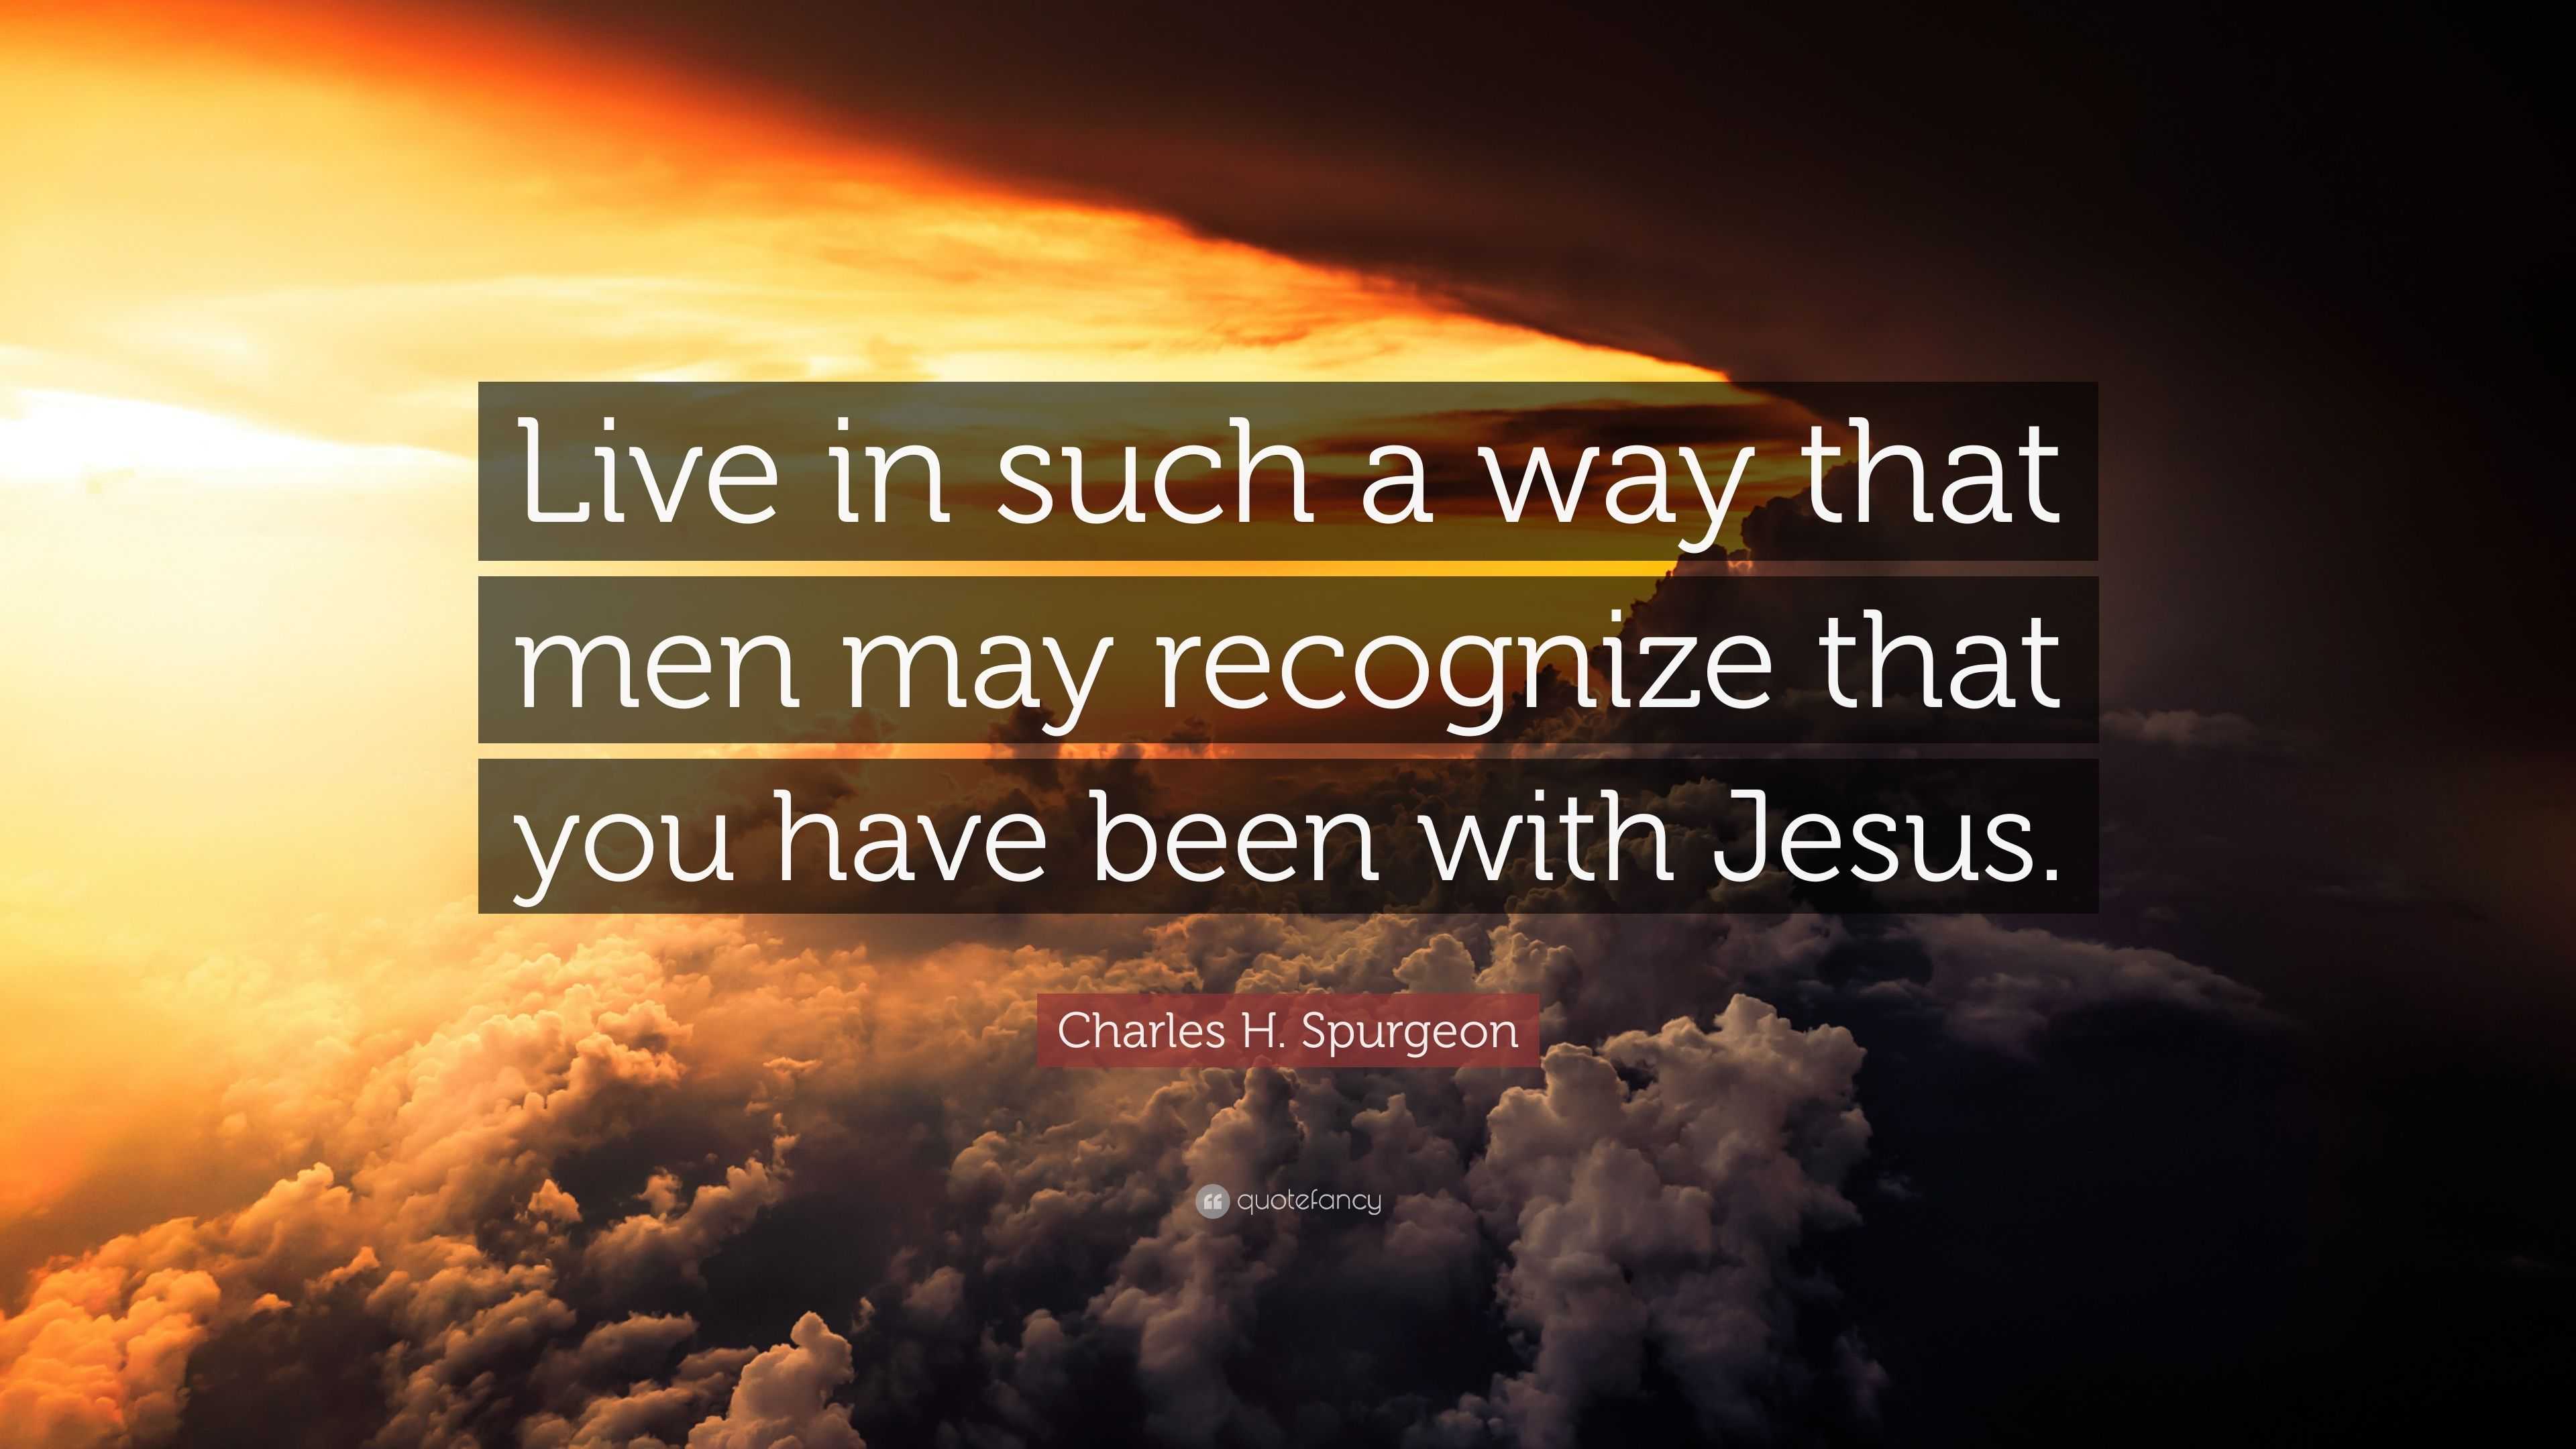 Charles H. Spurgeon Quote: “Live in such a way that men may recognize ...